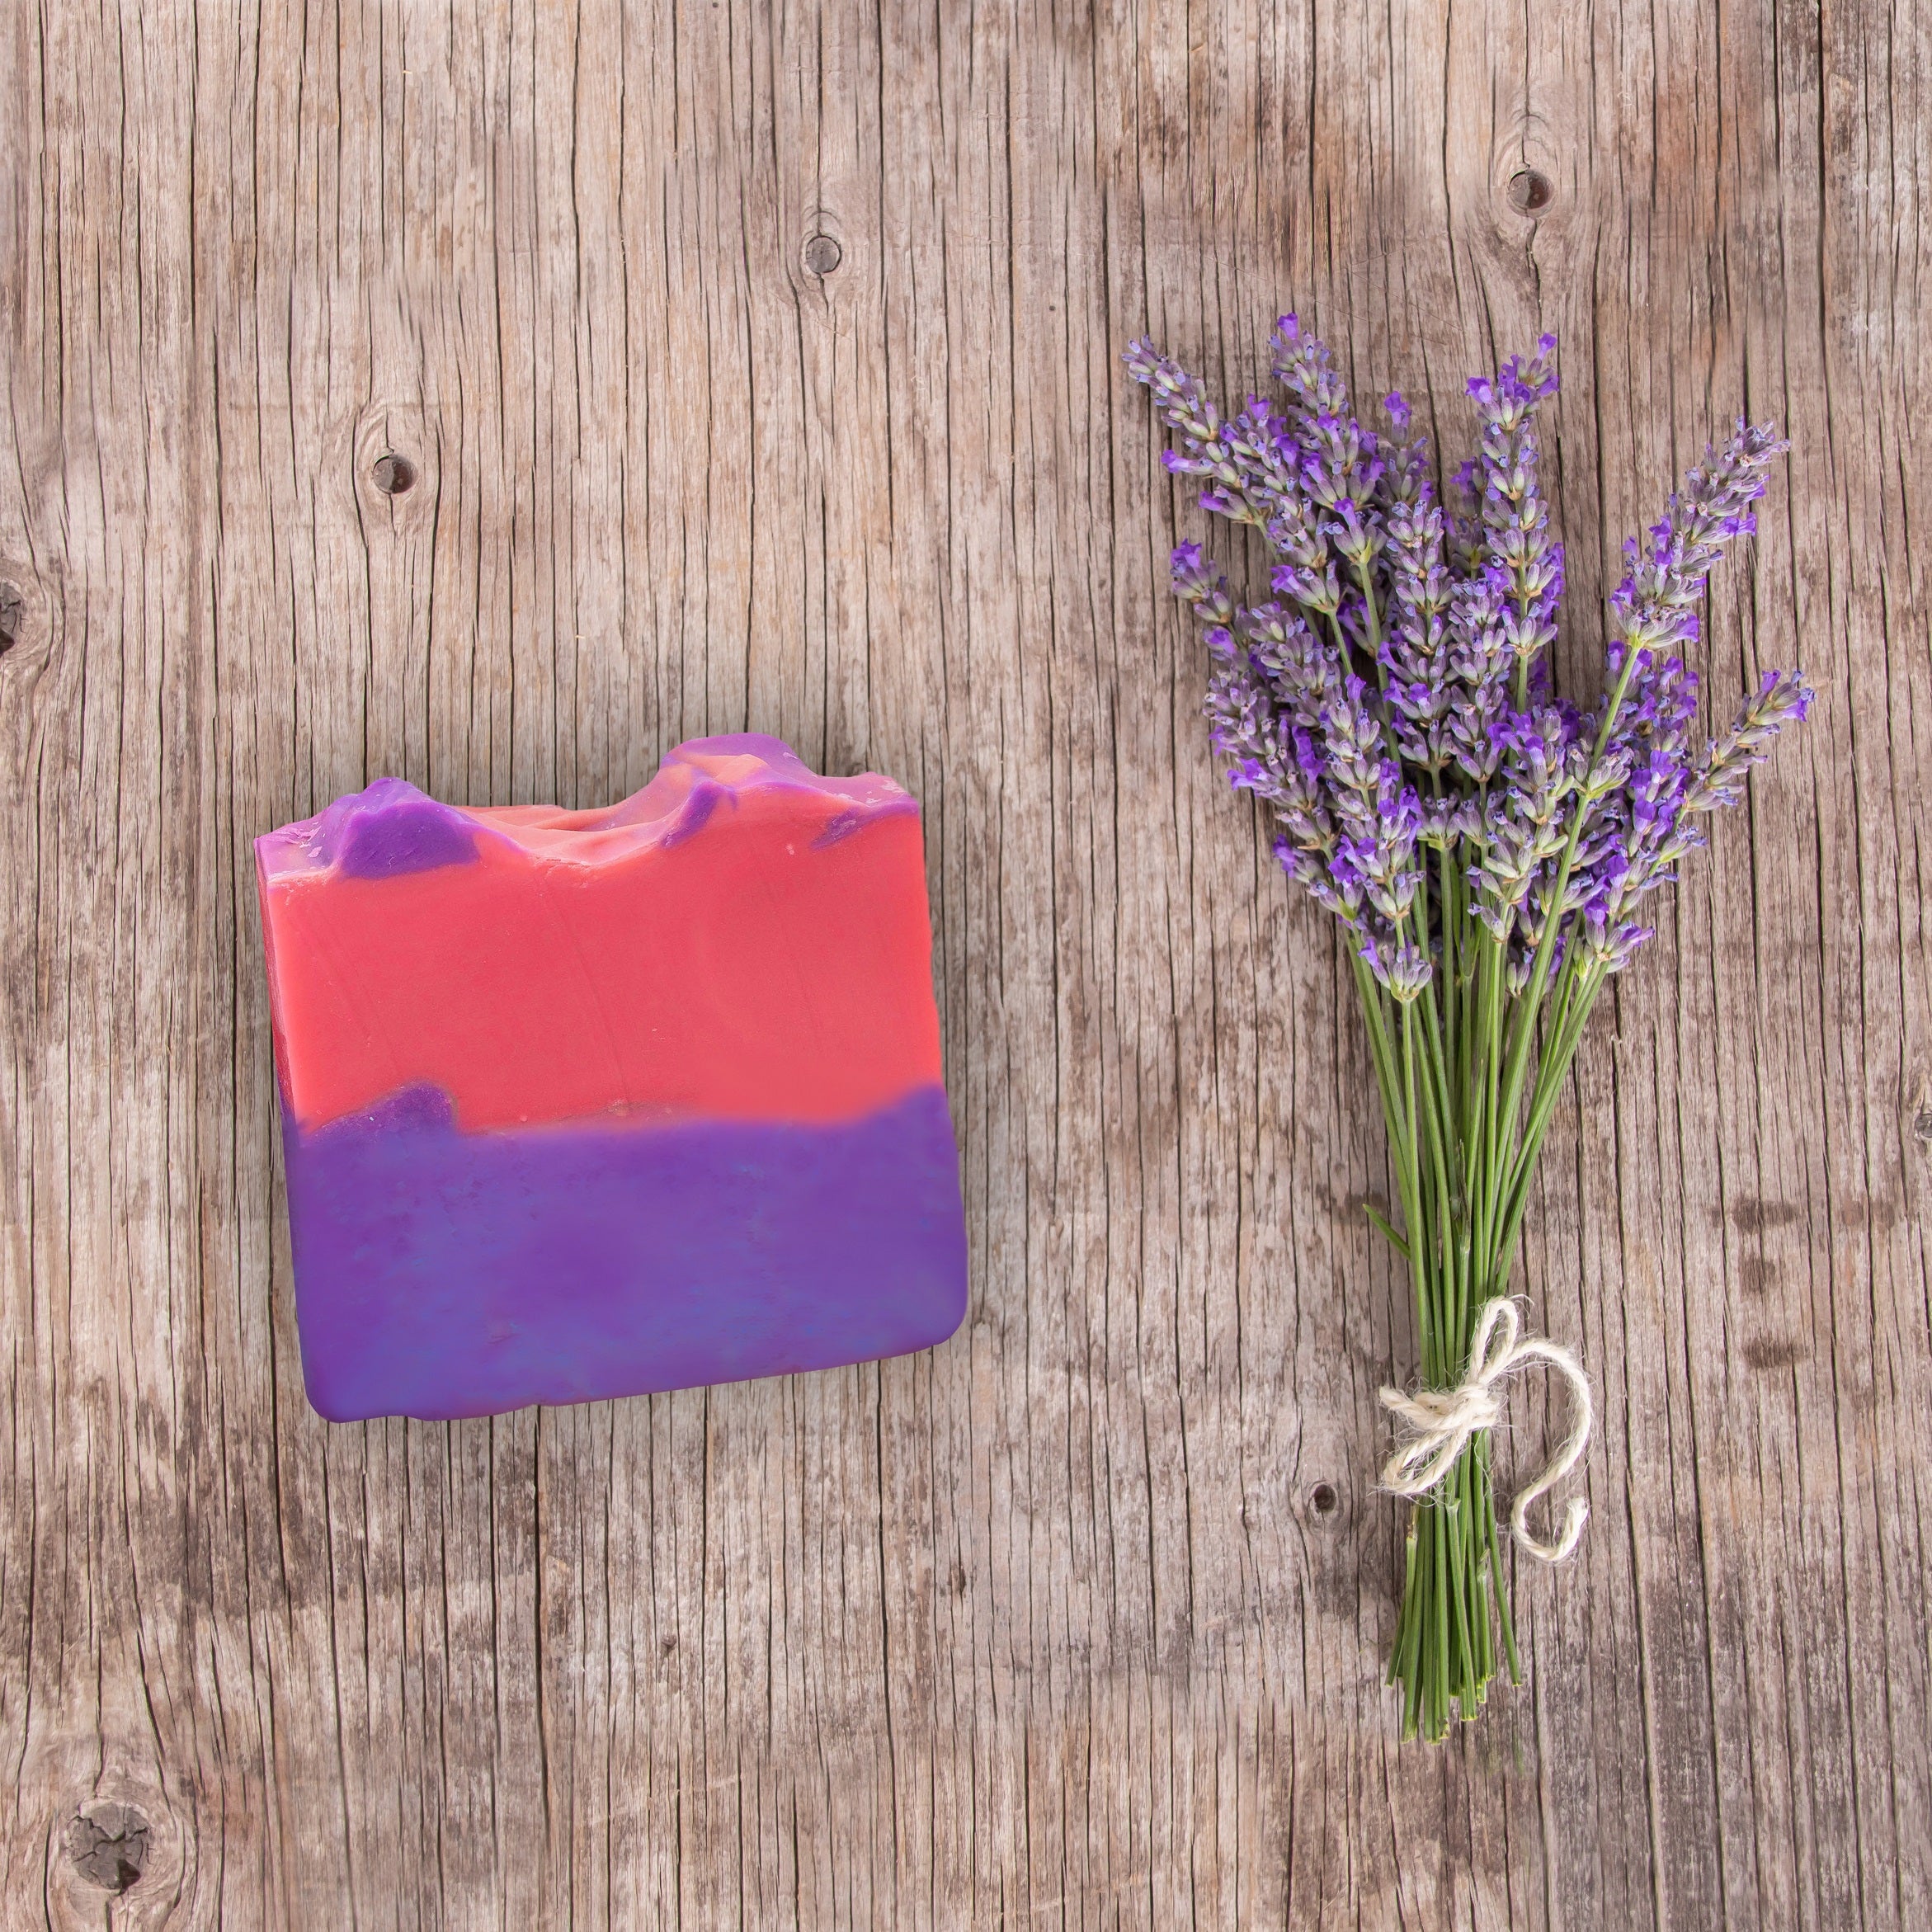 All Natural Hemp Oil & Lavender Soap Bar with Ecofriendly and Biodegradable Packaging (6 oz.)